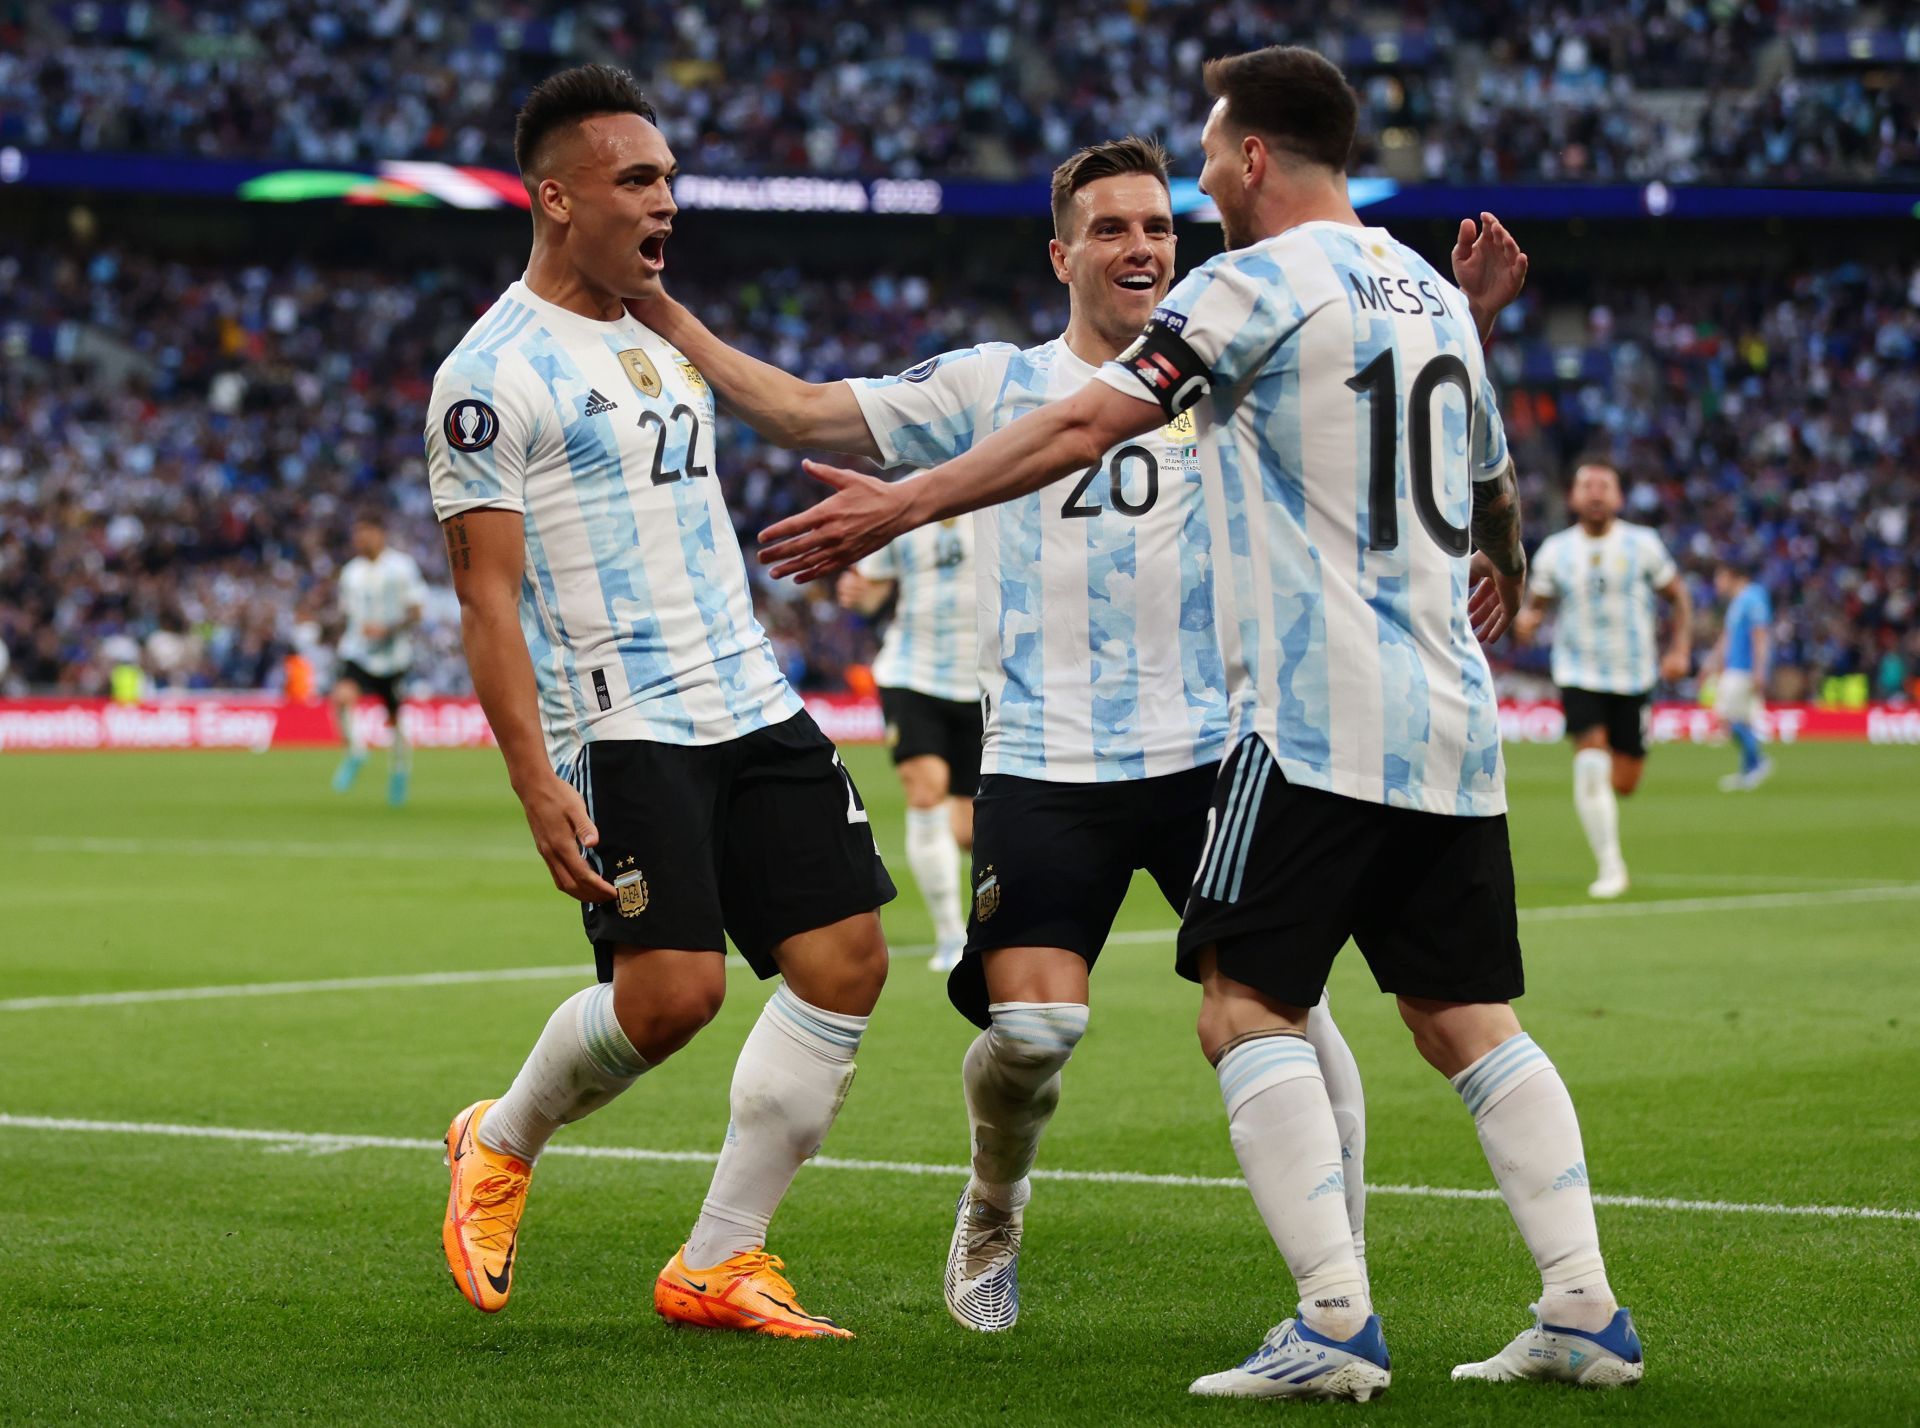 Lautaro Martinez (left) and Lionel Messi (right) ran riot for Argentina against Italy.